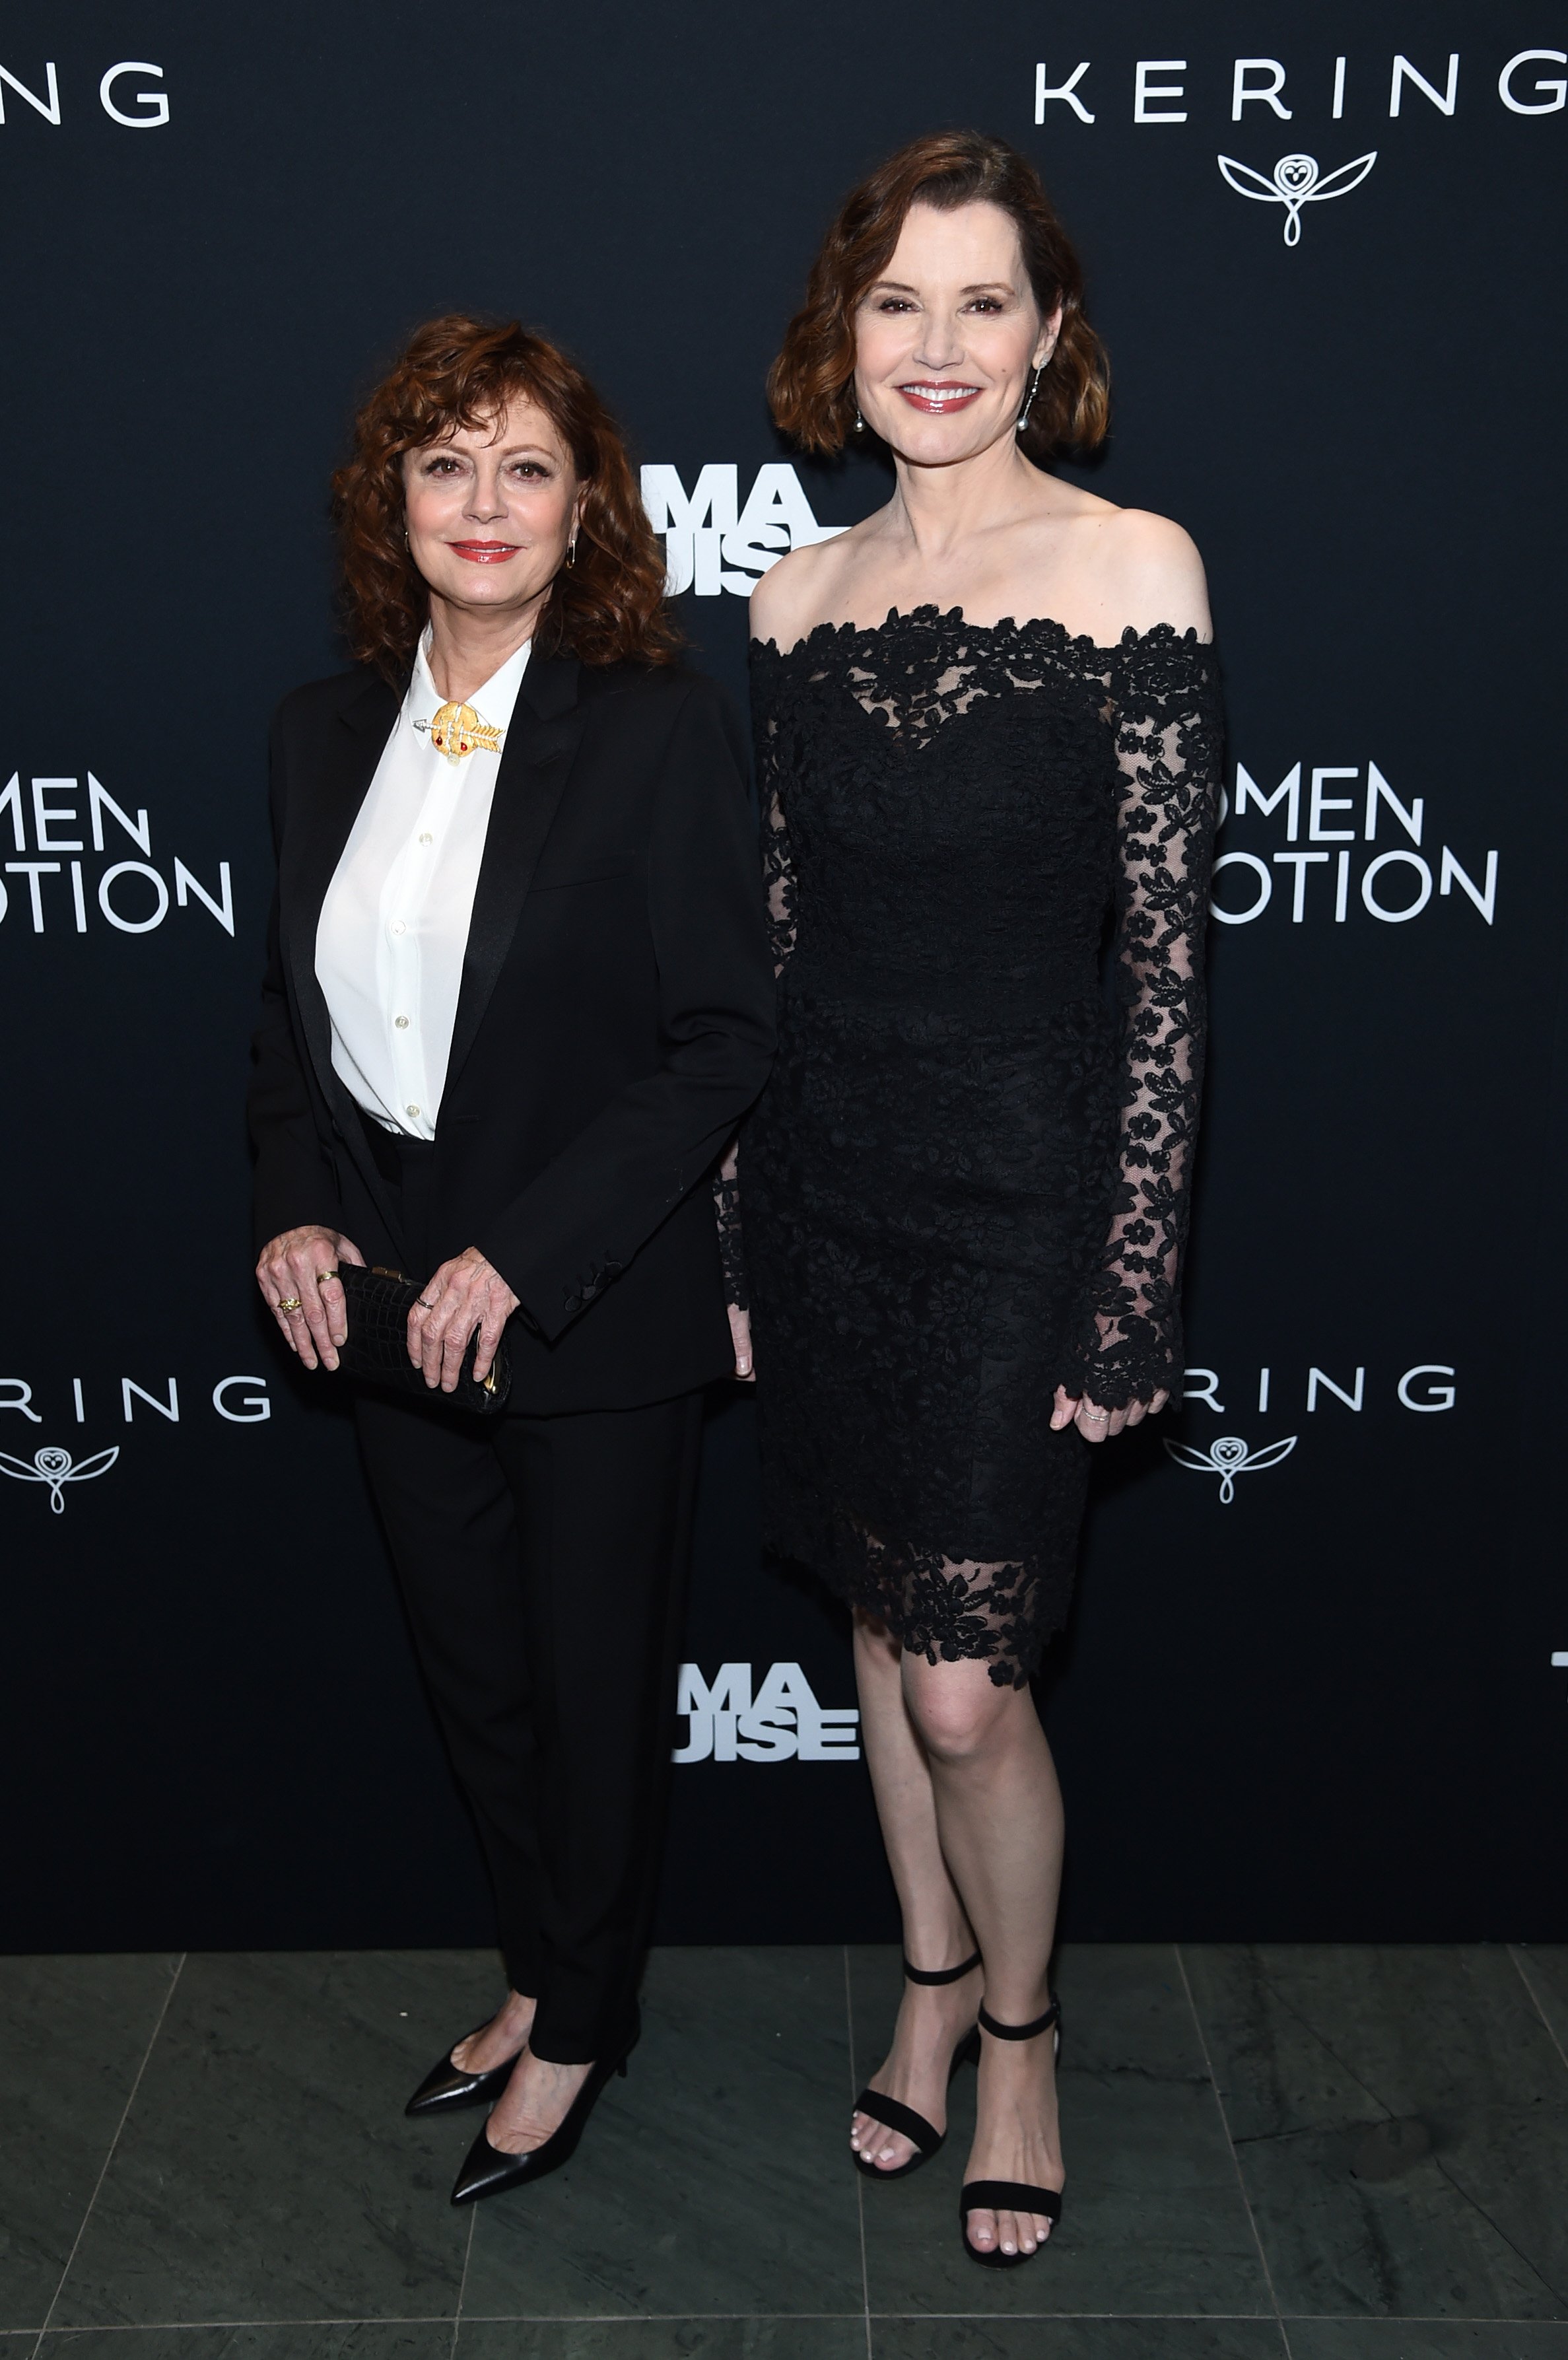 Susan Sarandon and Geena Davis attend the screening of "Thelma & Louise" Women In Motion on January 28, 2020, in New York City. | Source: Getty Images.